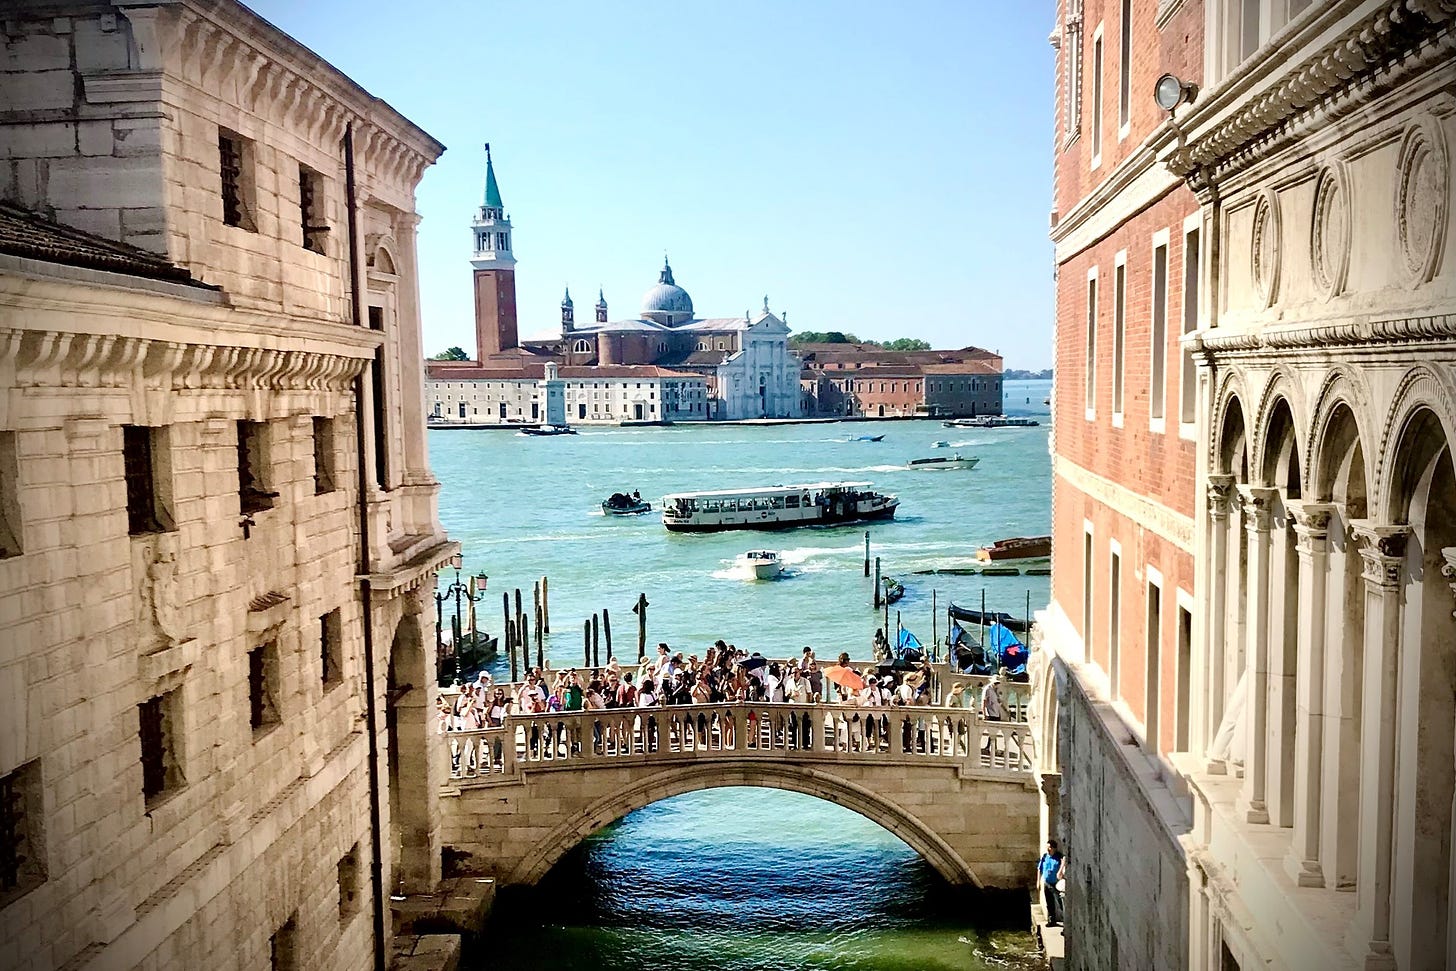 San Giorgio Maggiore from the Bridge of Sighs. Photo by author